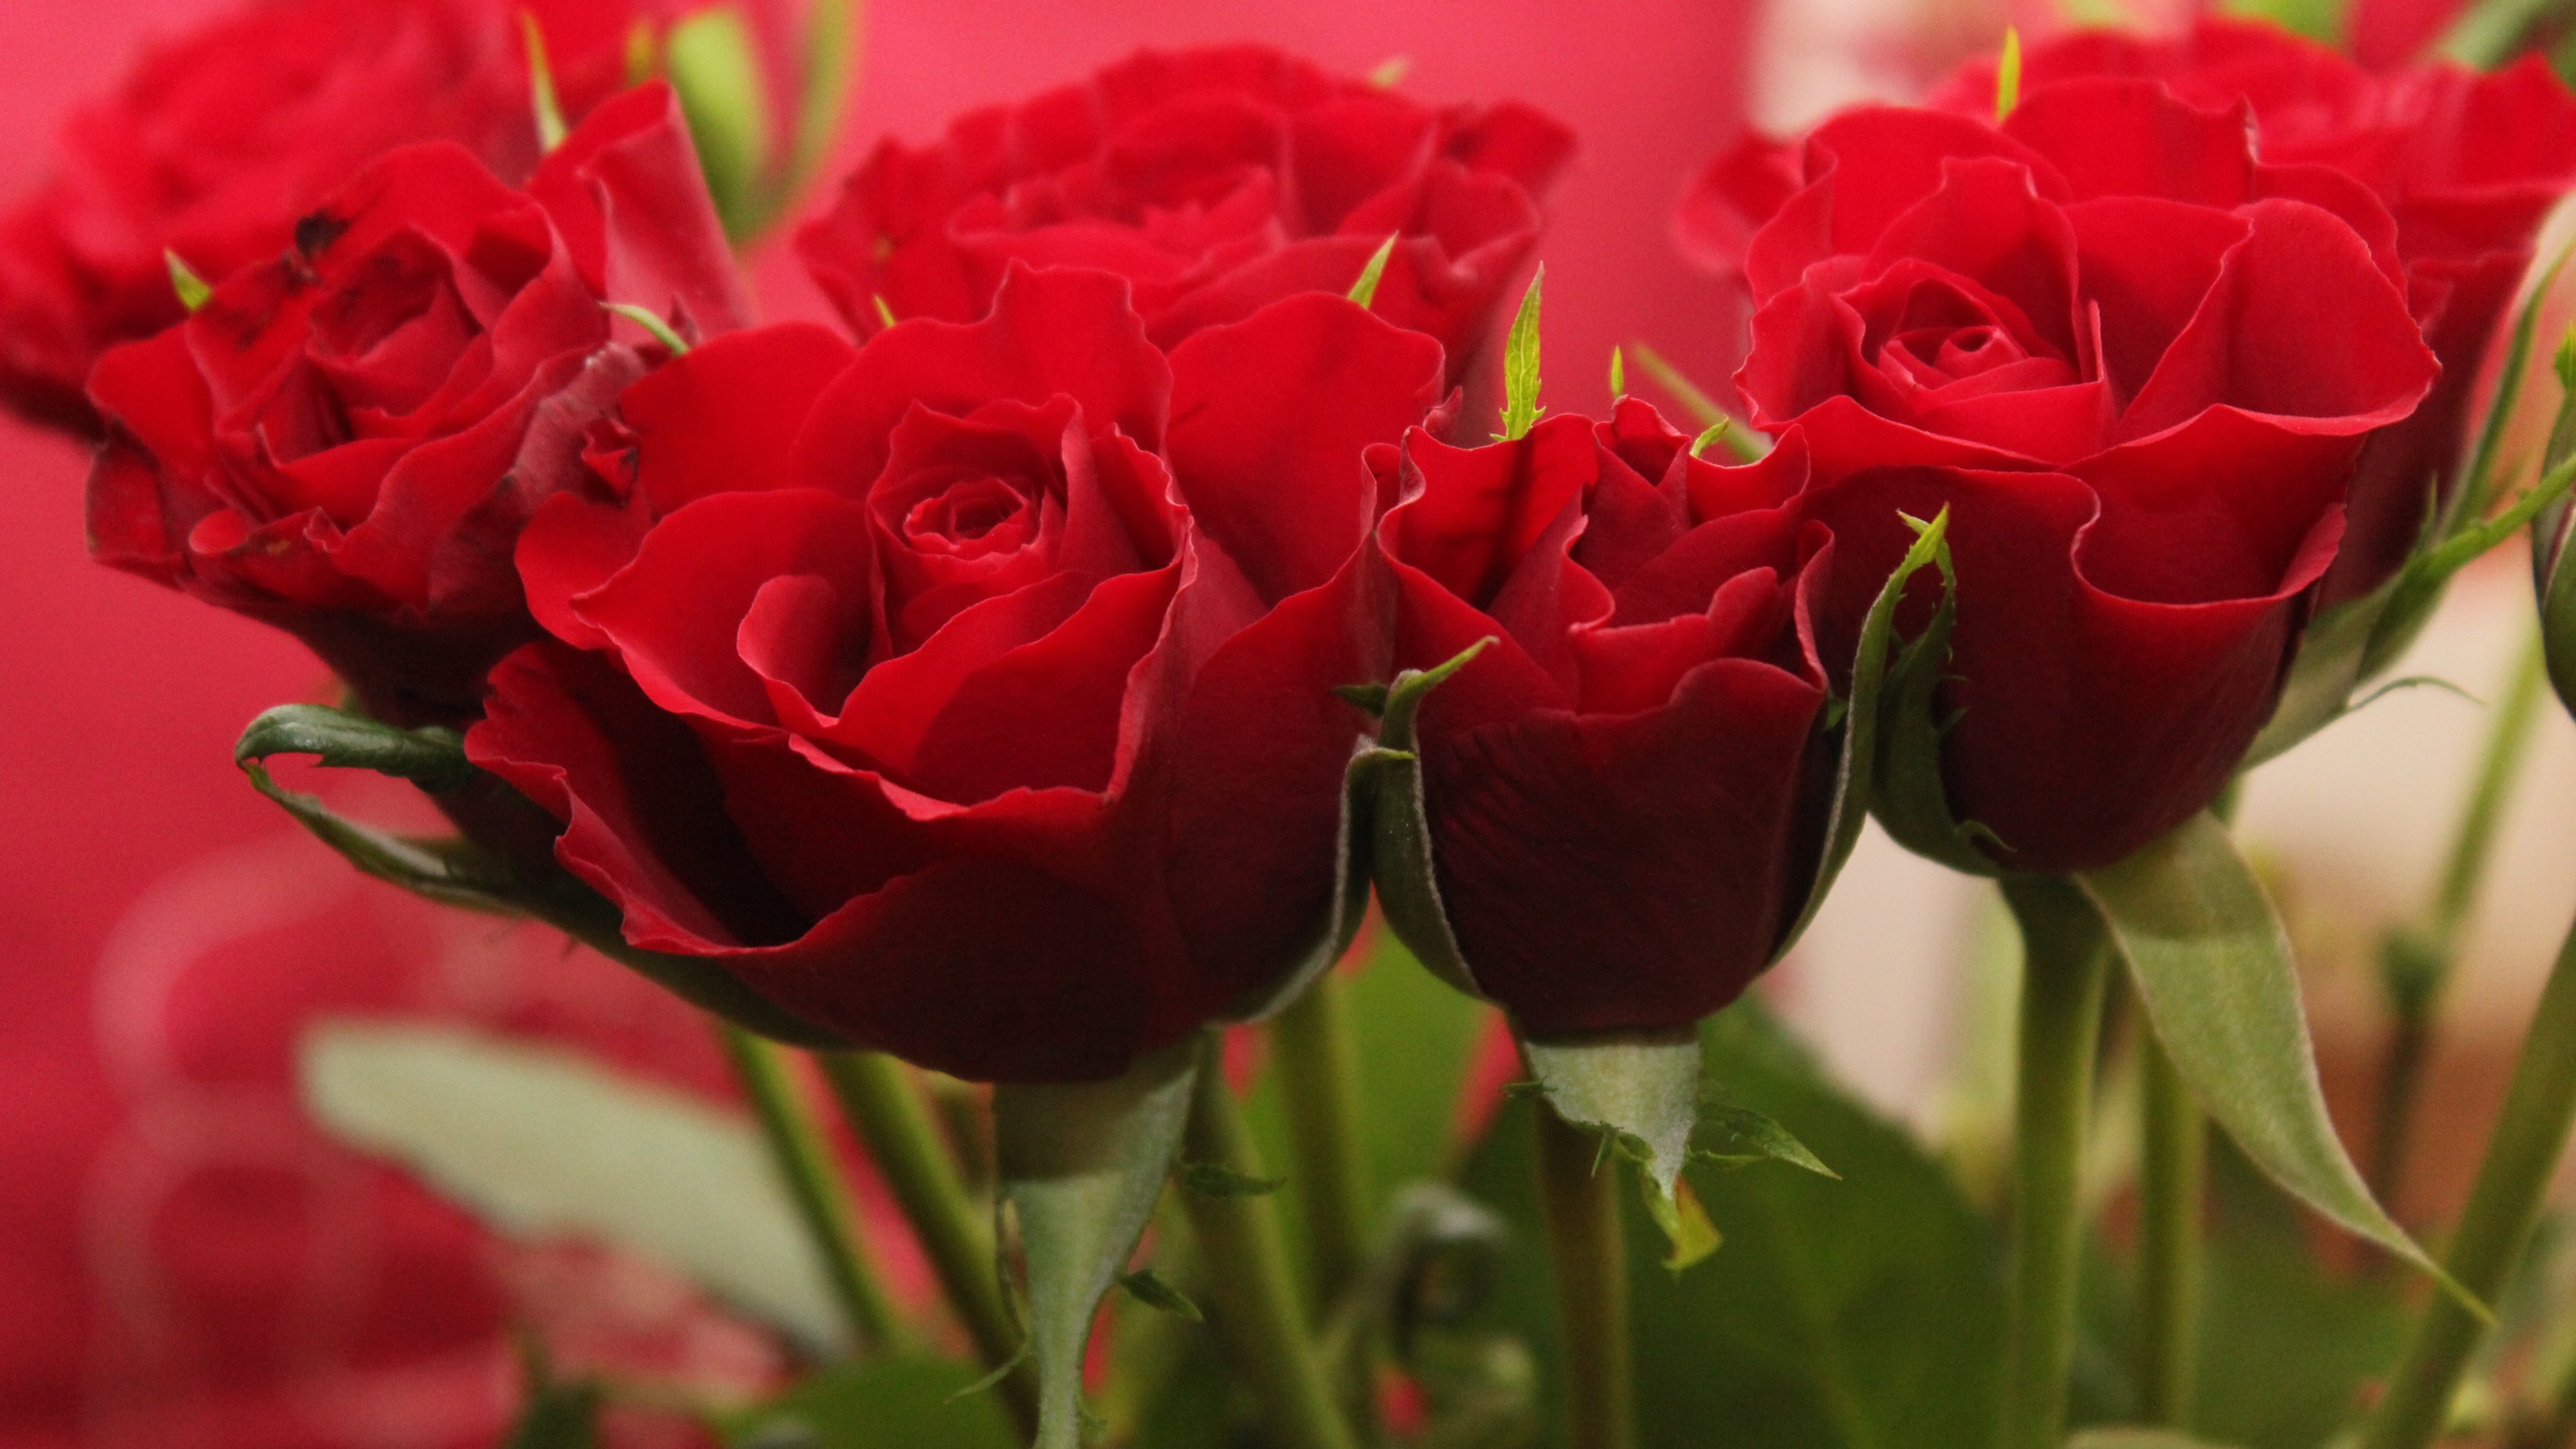 Red Roses Wallpaper - iPhone, Android & Desktop Backgrounds